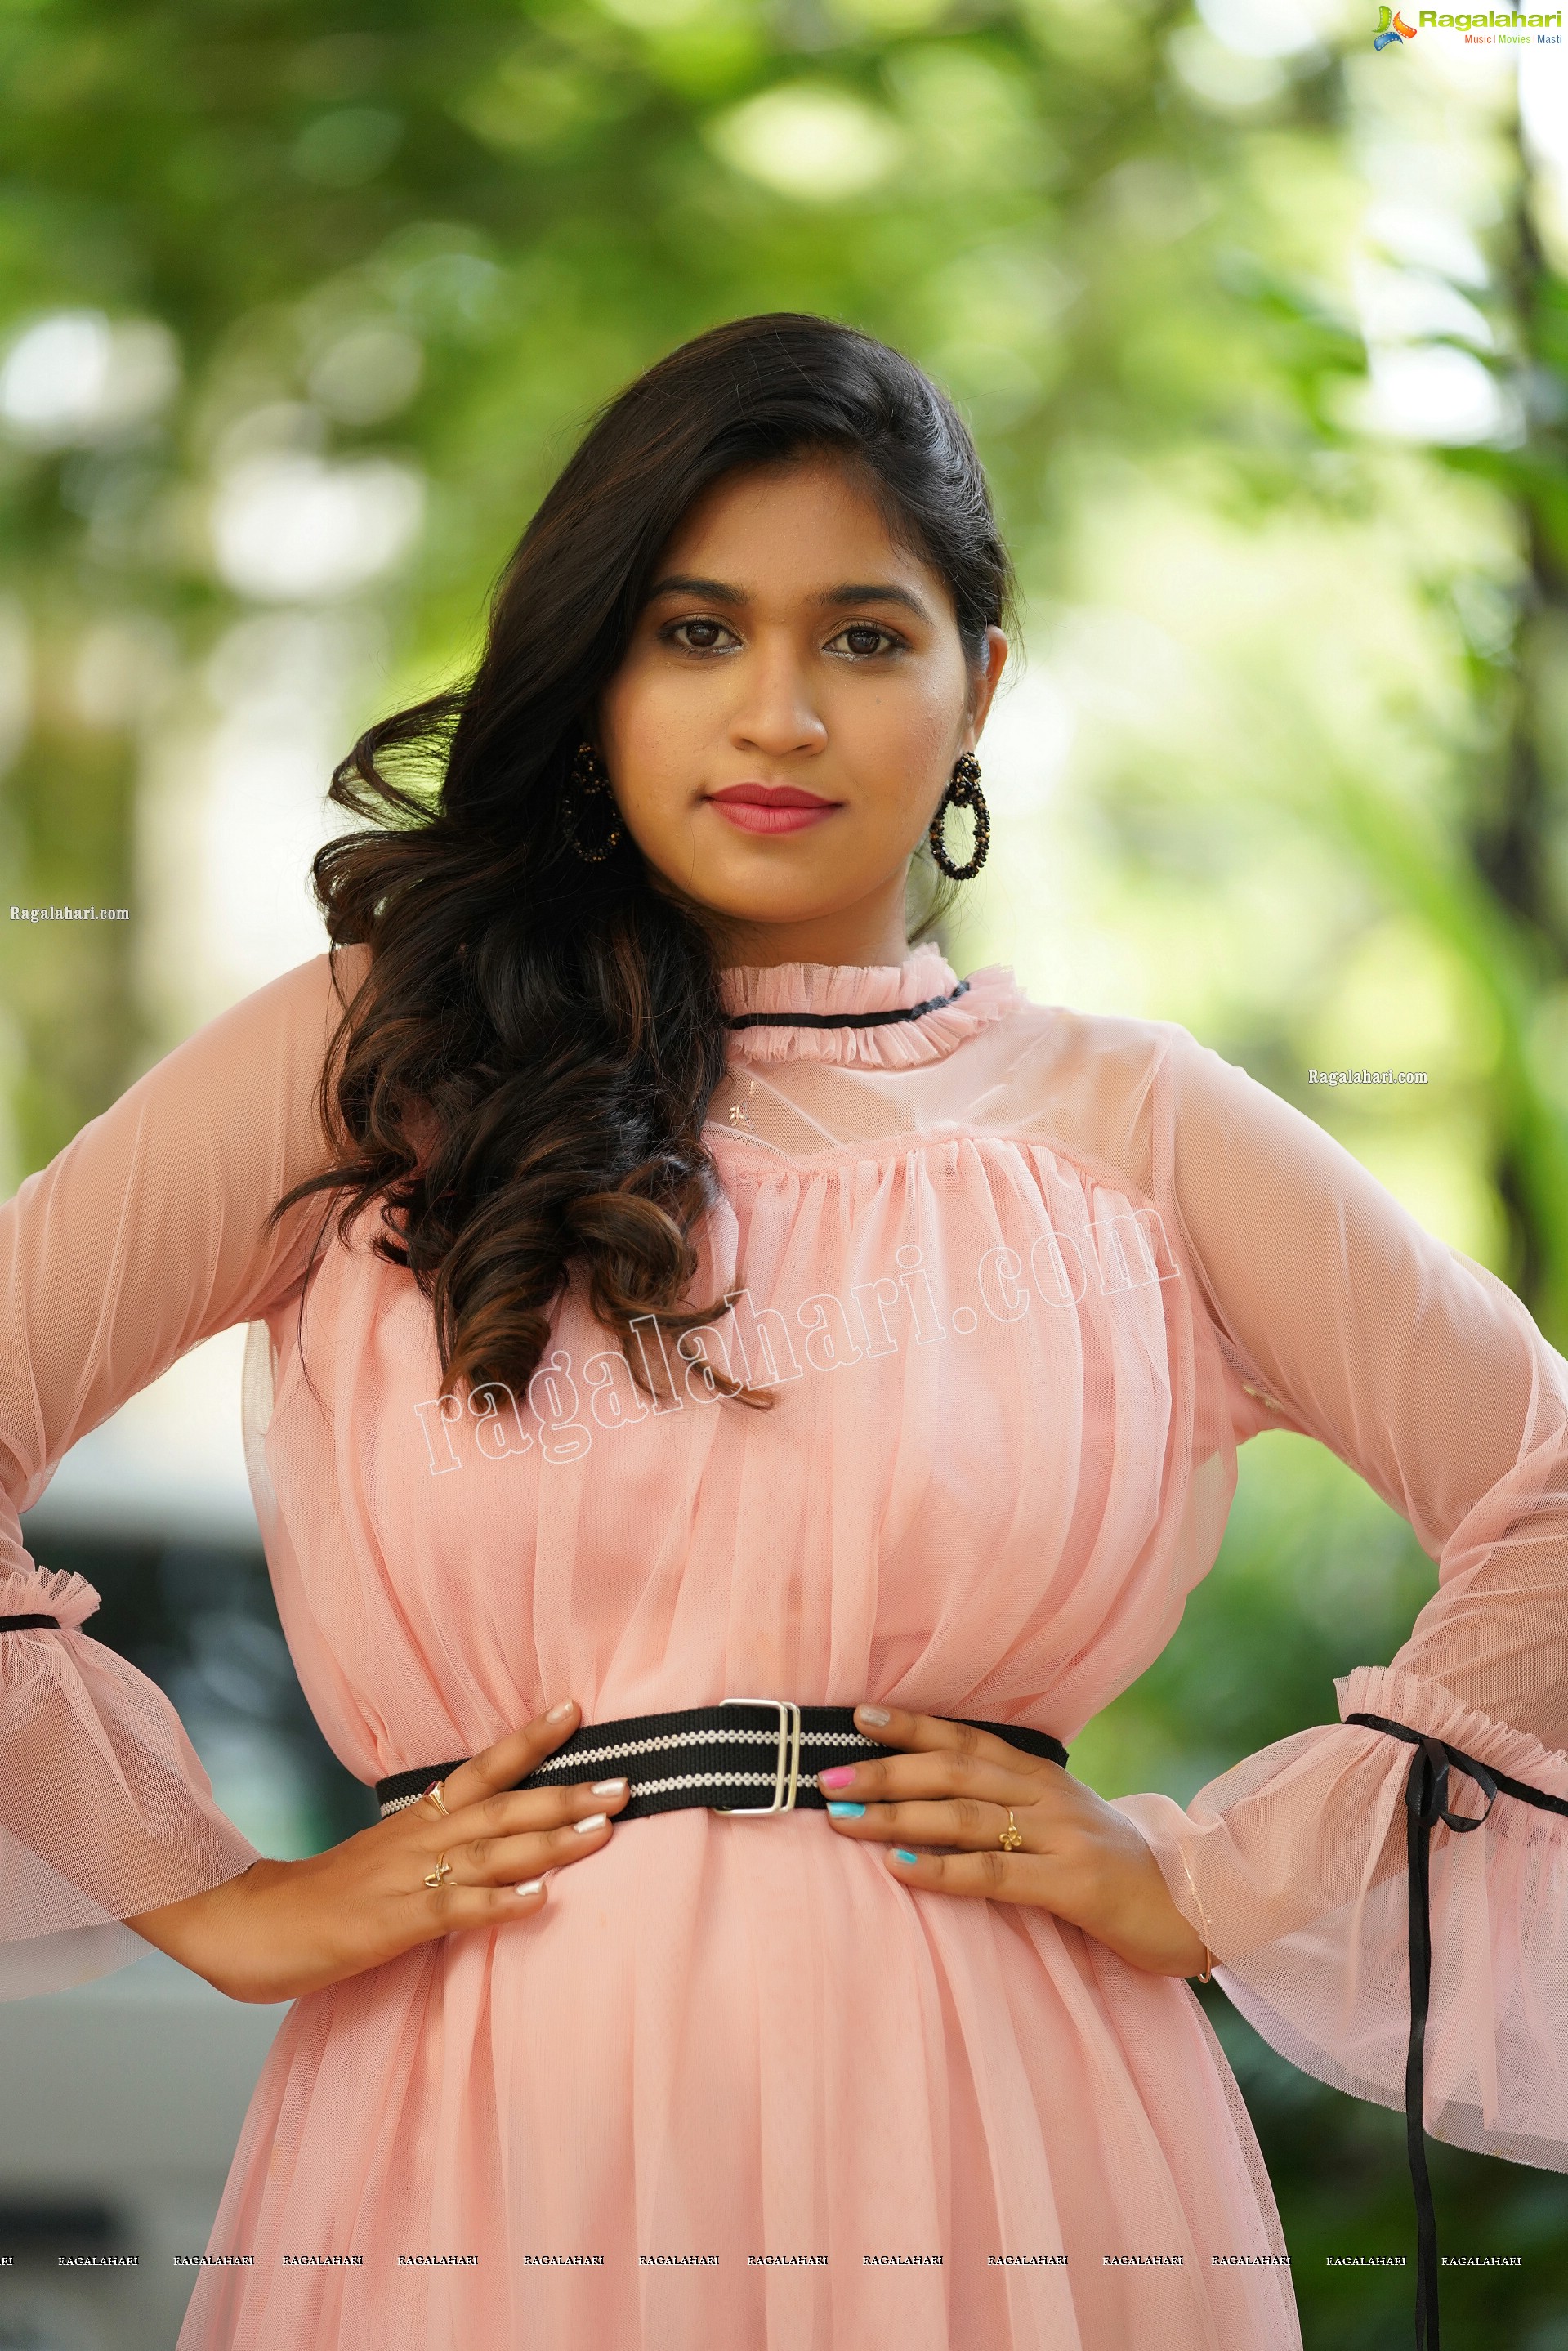 Honey Royal in Baby Pink Mini Frill Dress, Exclusive Photoshoot